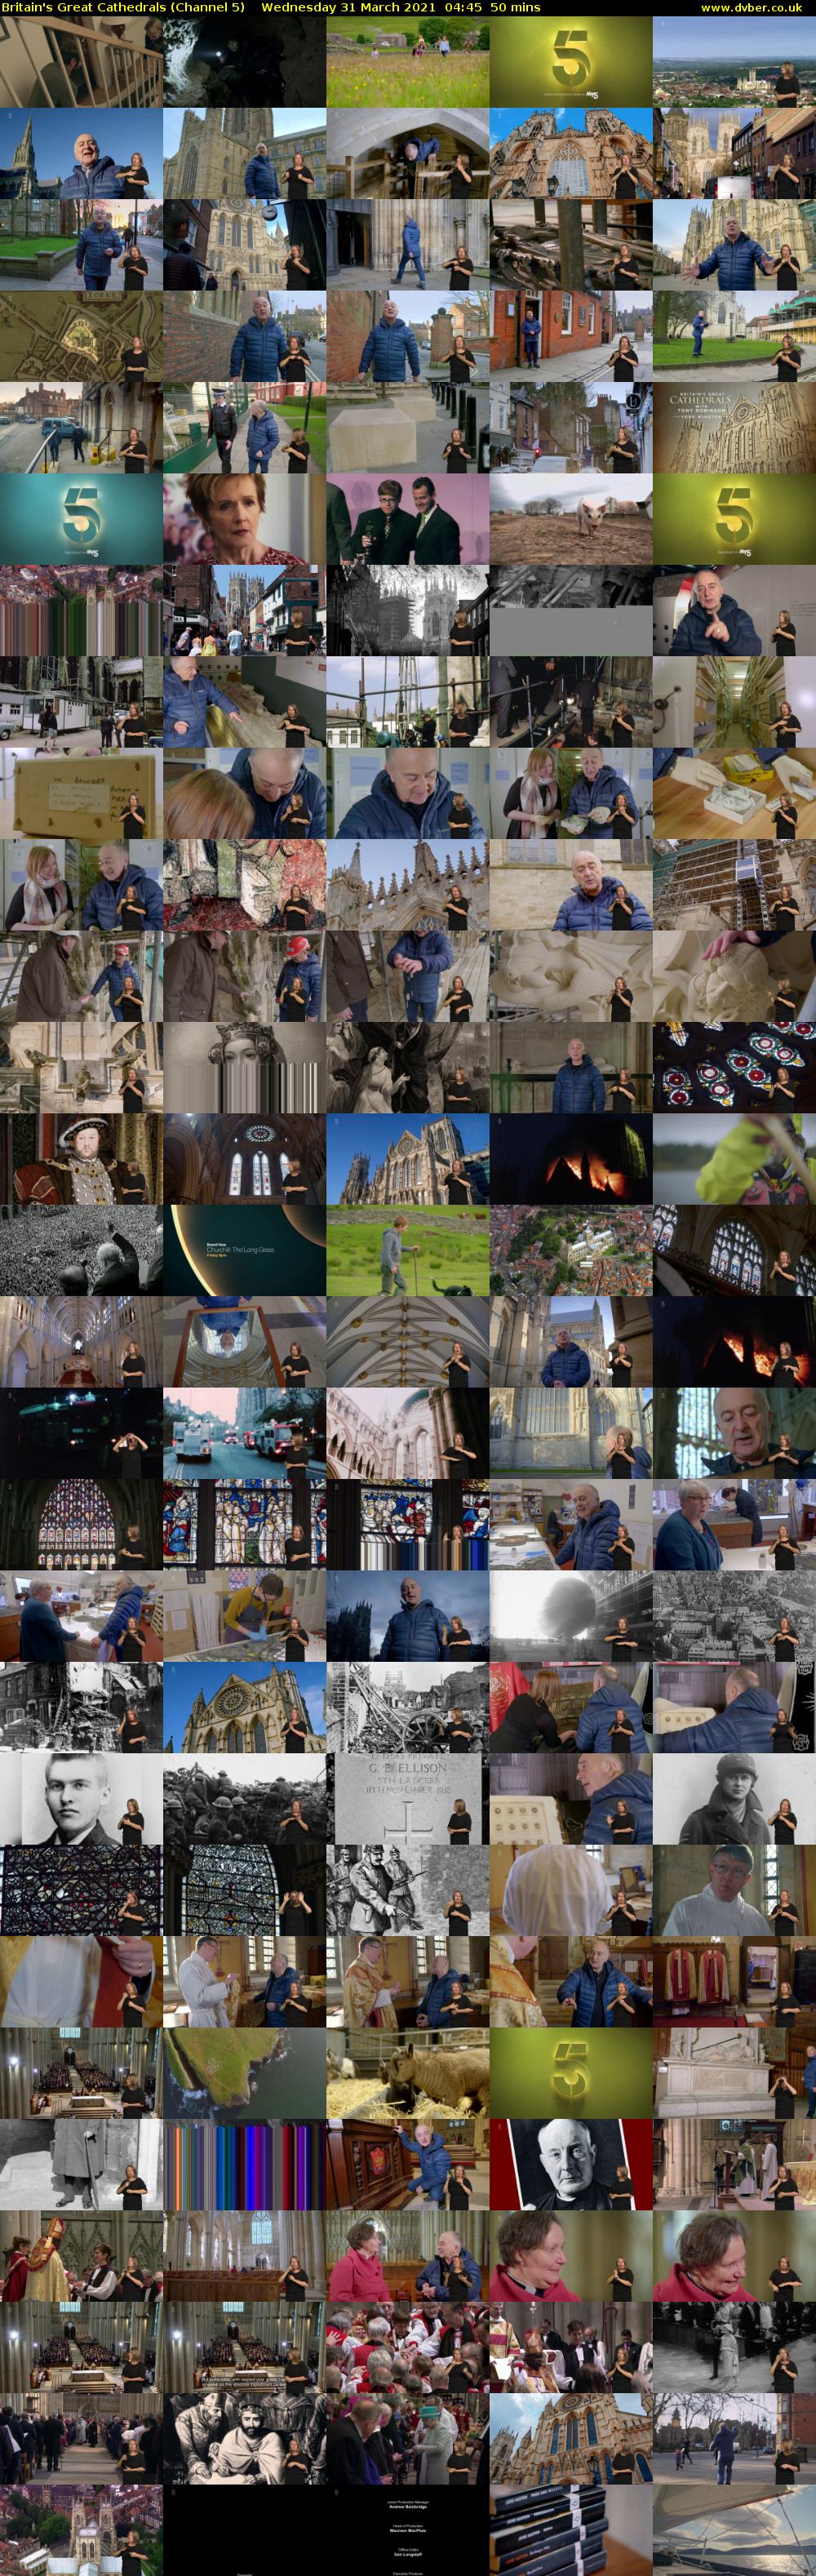 Britain's Great Cathedrals (Channel 5) Wednesday 31 March 2021 04:45 - 05:35